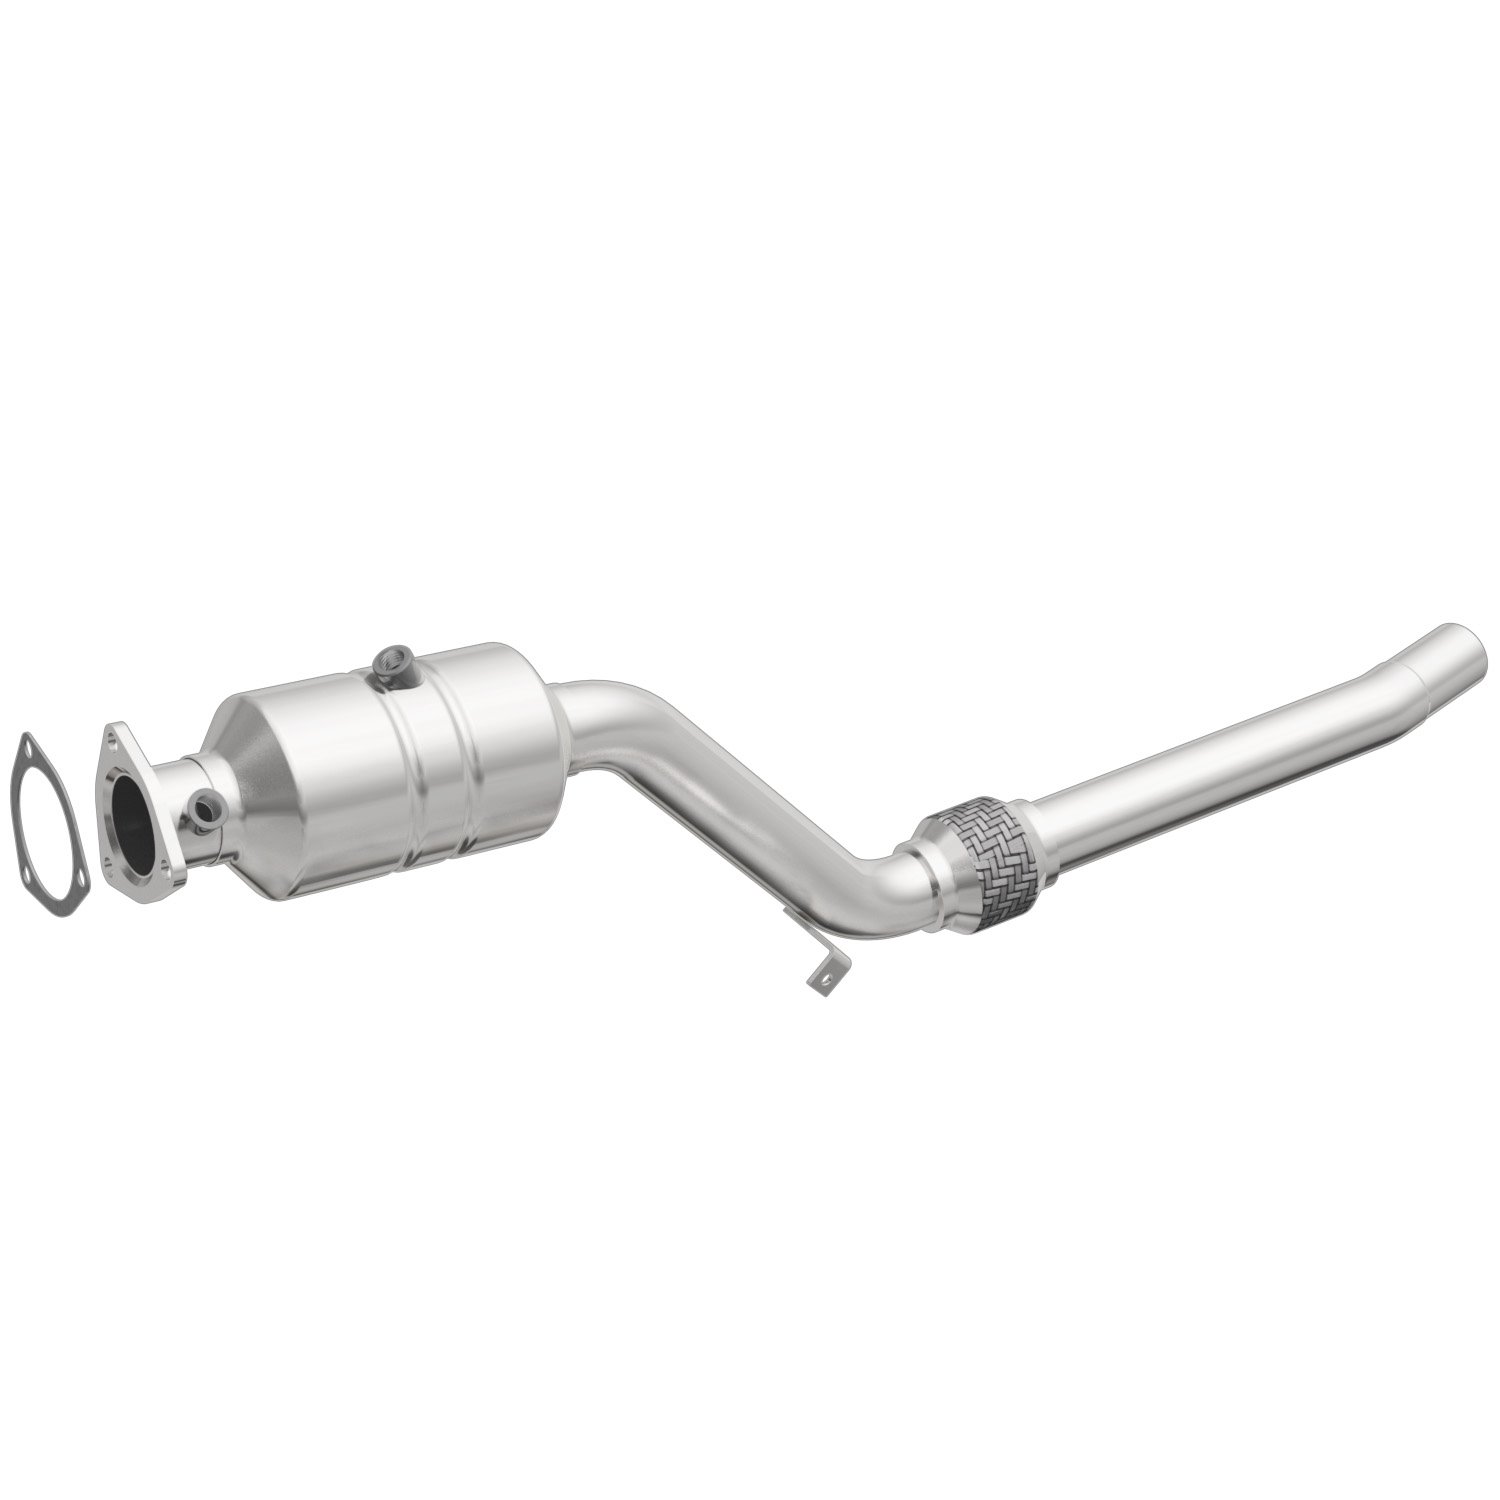 HM Grade Federal / EPA Compliant Direct-Fit Catalytic Converter 24176